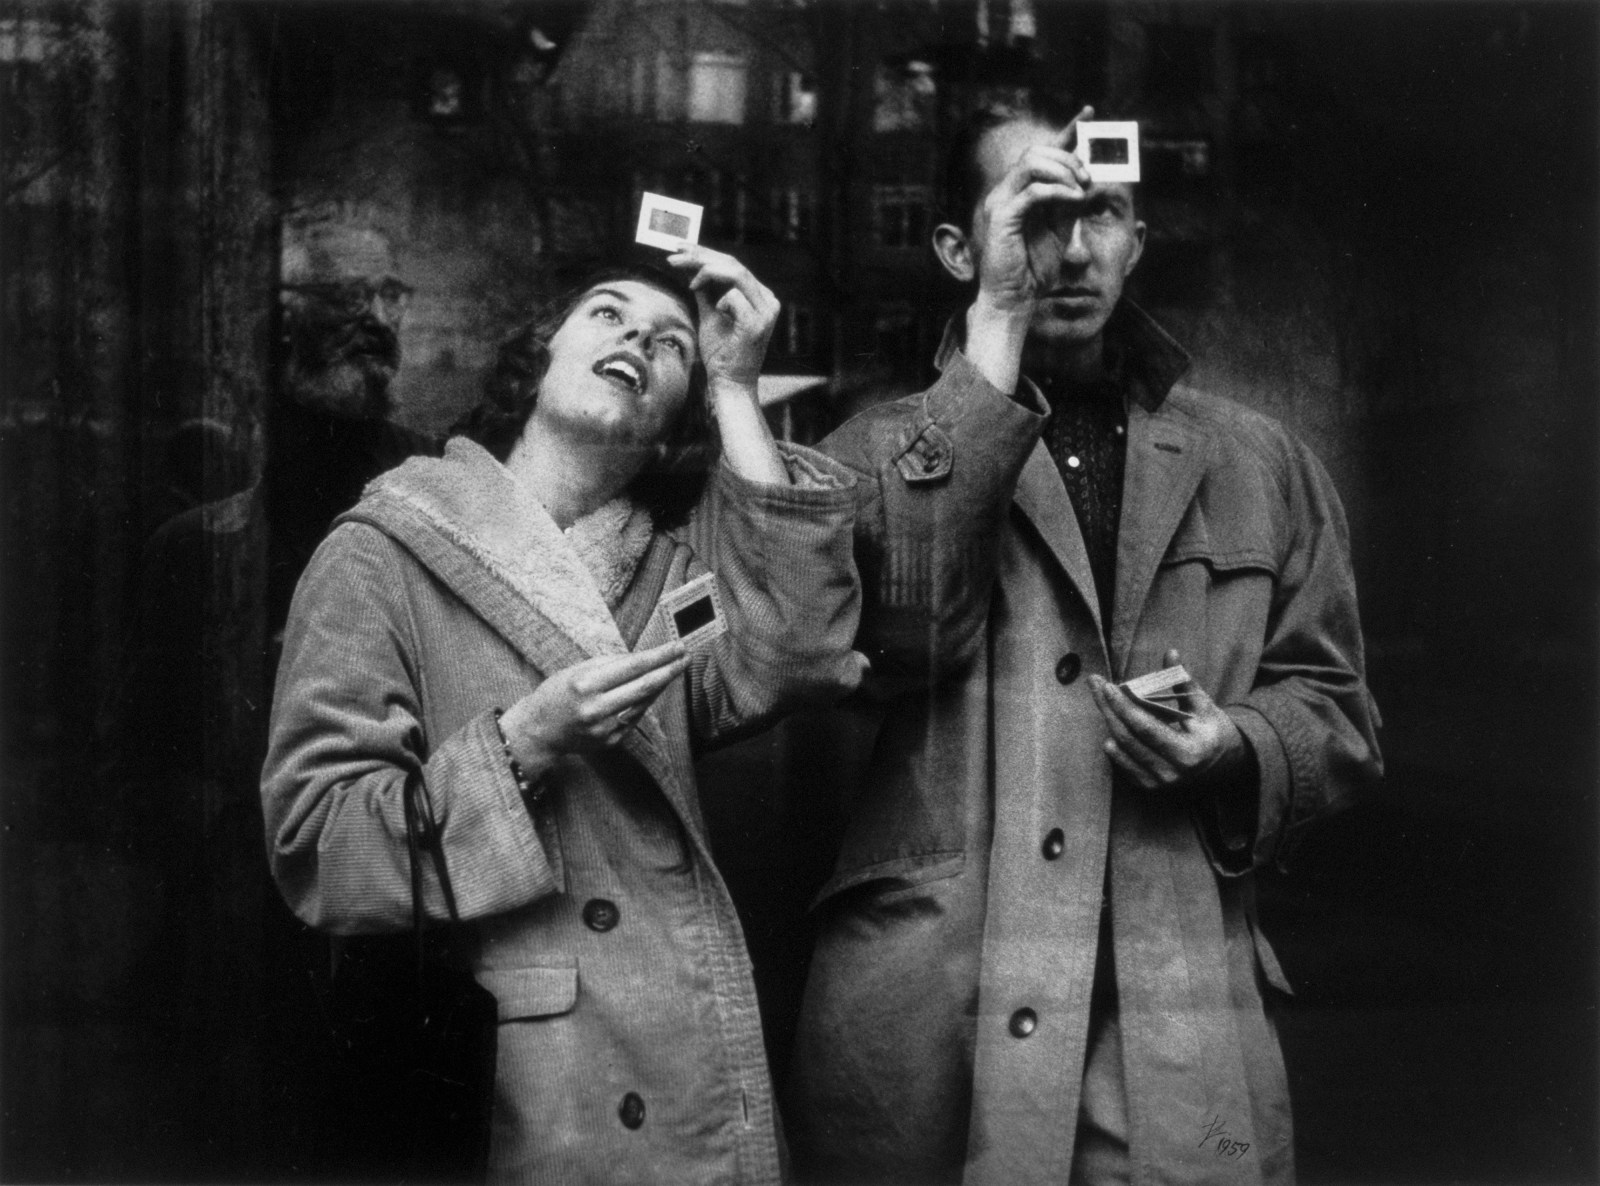 A man and a woman photographed in black and white hold up slides and look through them to see the image